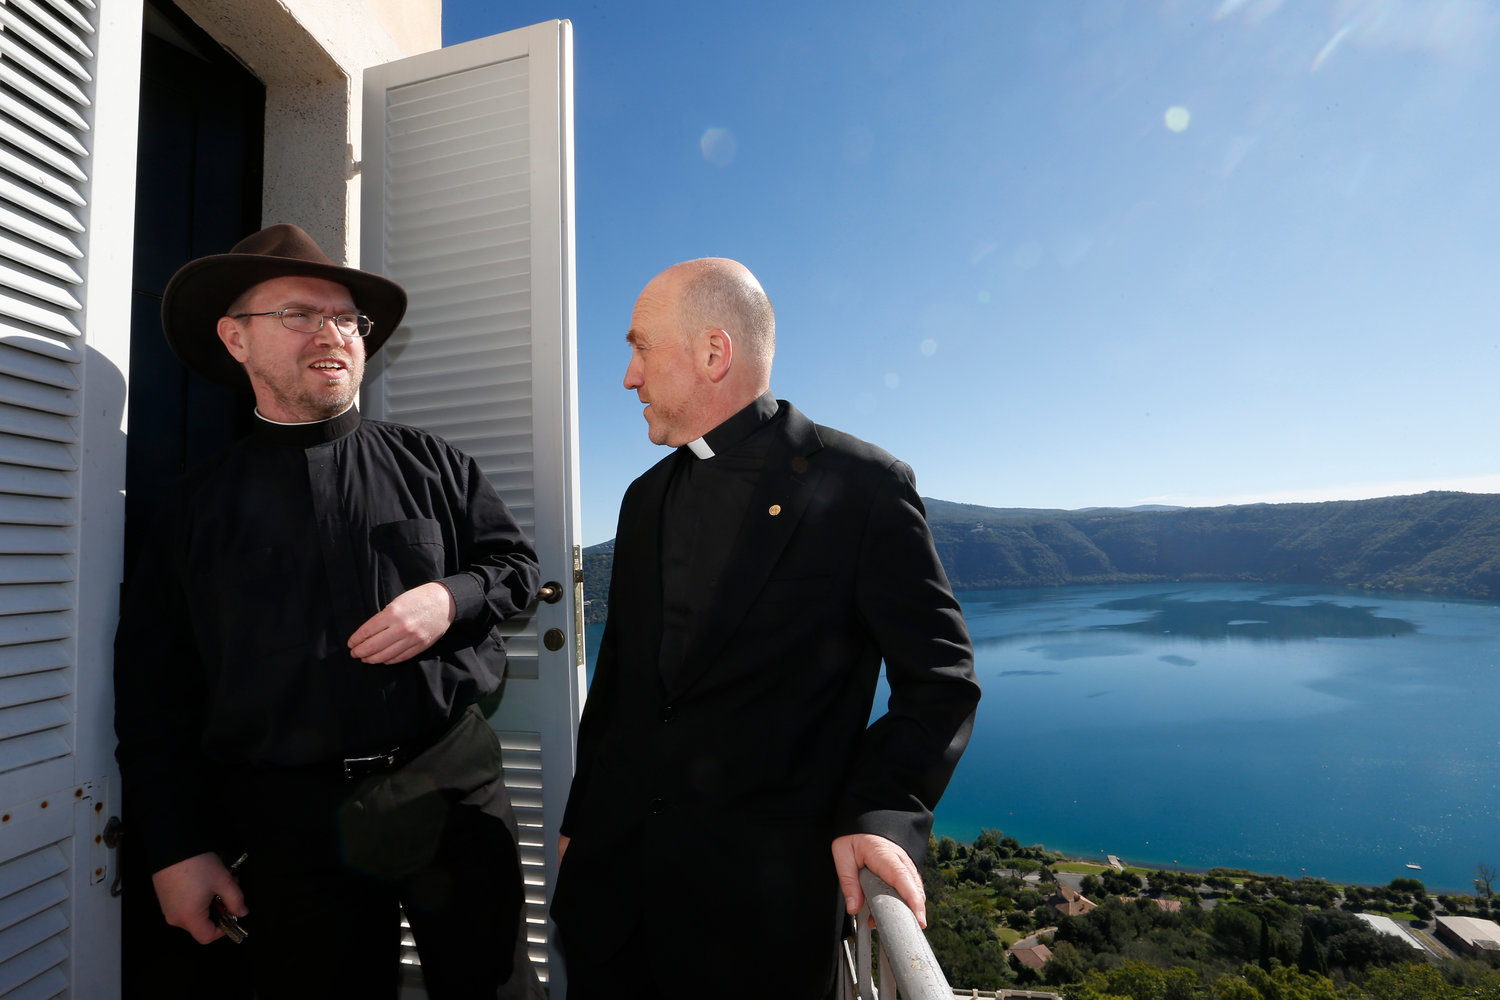 Jesuit Brother Bob Macke and Jesuit Father Gabriele Gionti, an astronomer, prepare to give journalists a tour of the Vatican Observatory at the papal villa at Castel Gandolfo, Italy, Sept. 28, 2018. Brother Macke said that by studying the universe, “we can better appreciate the God who created it.”